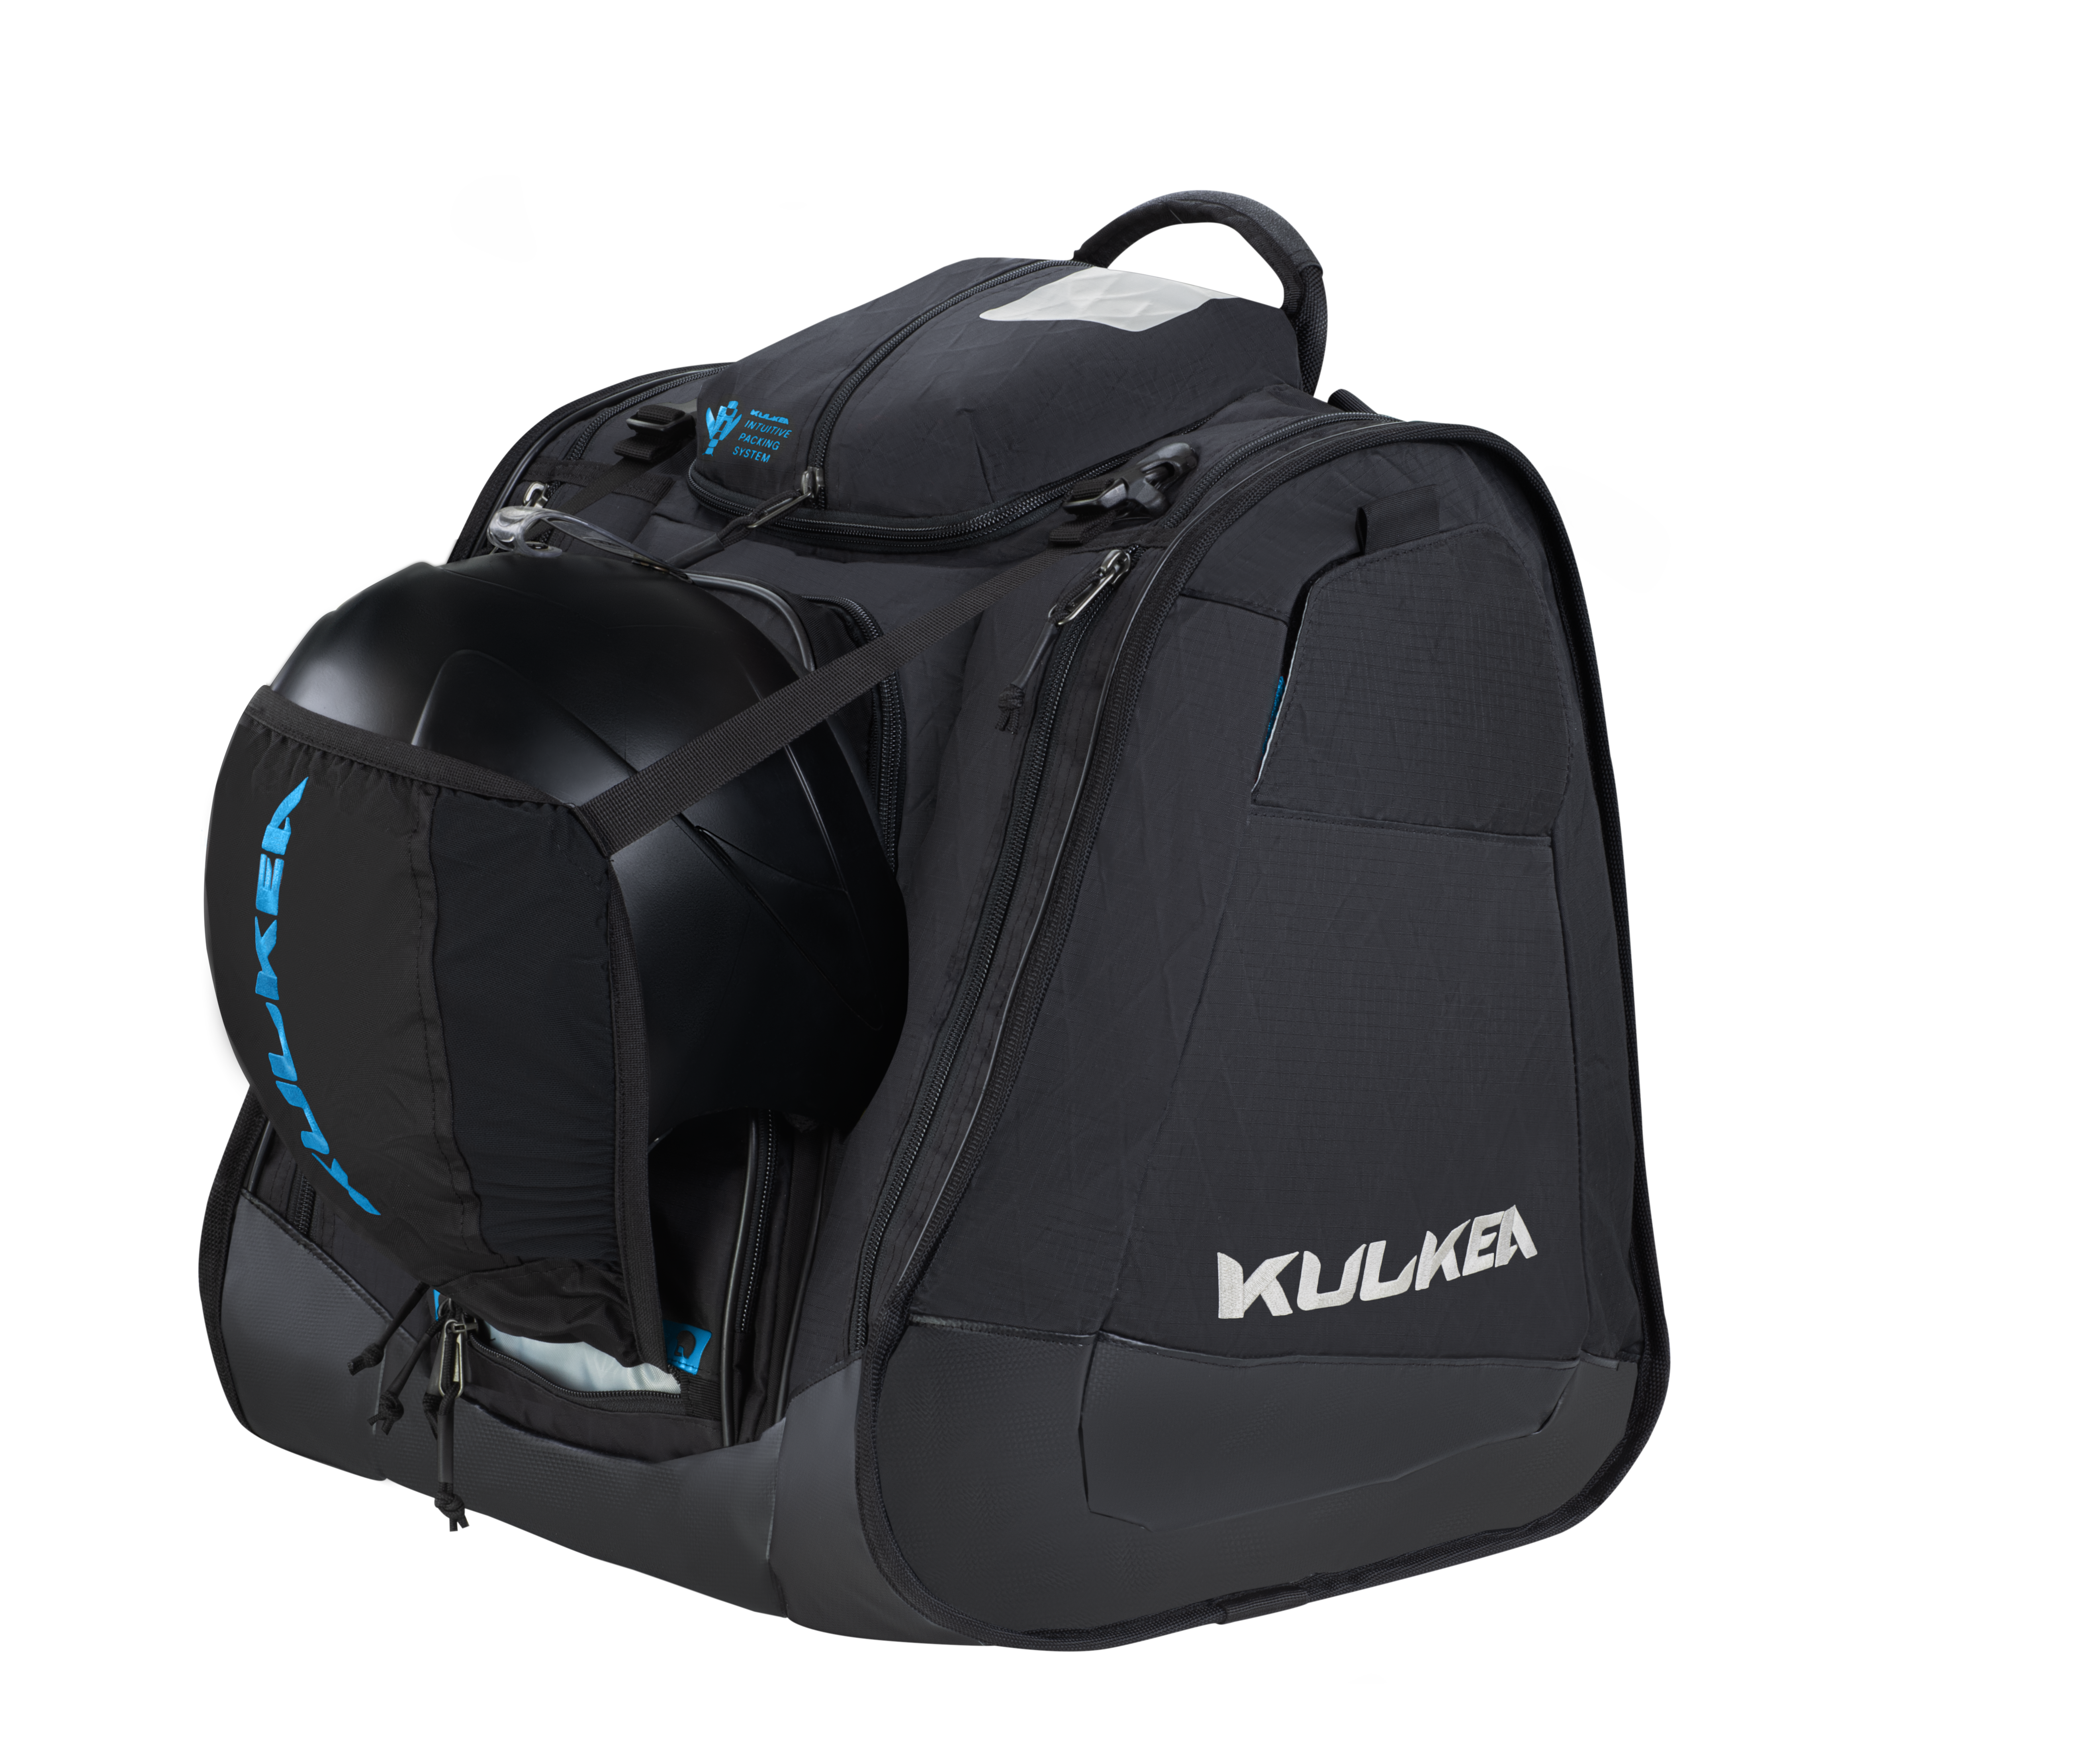 Kulkea boot bag in black with blue accents, tons of compartments, large enough to fit ski boots and most if not all your other ski gear including helmet.